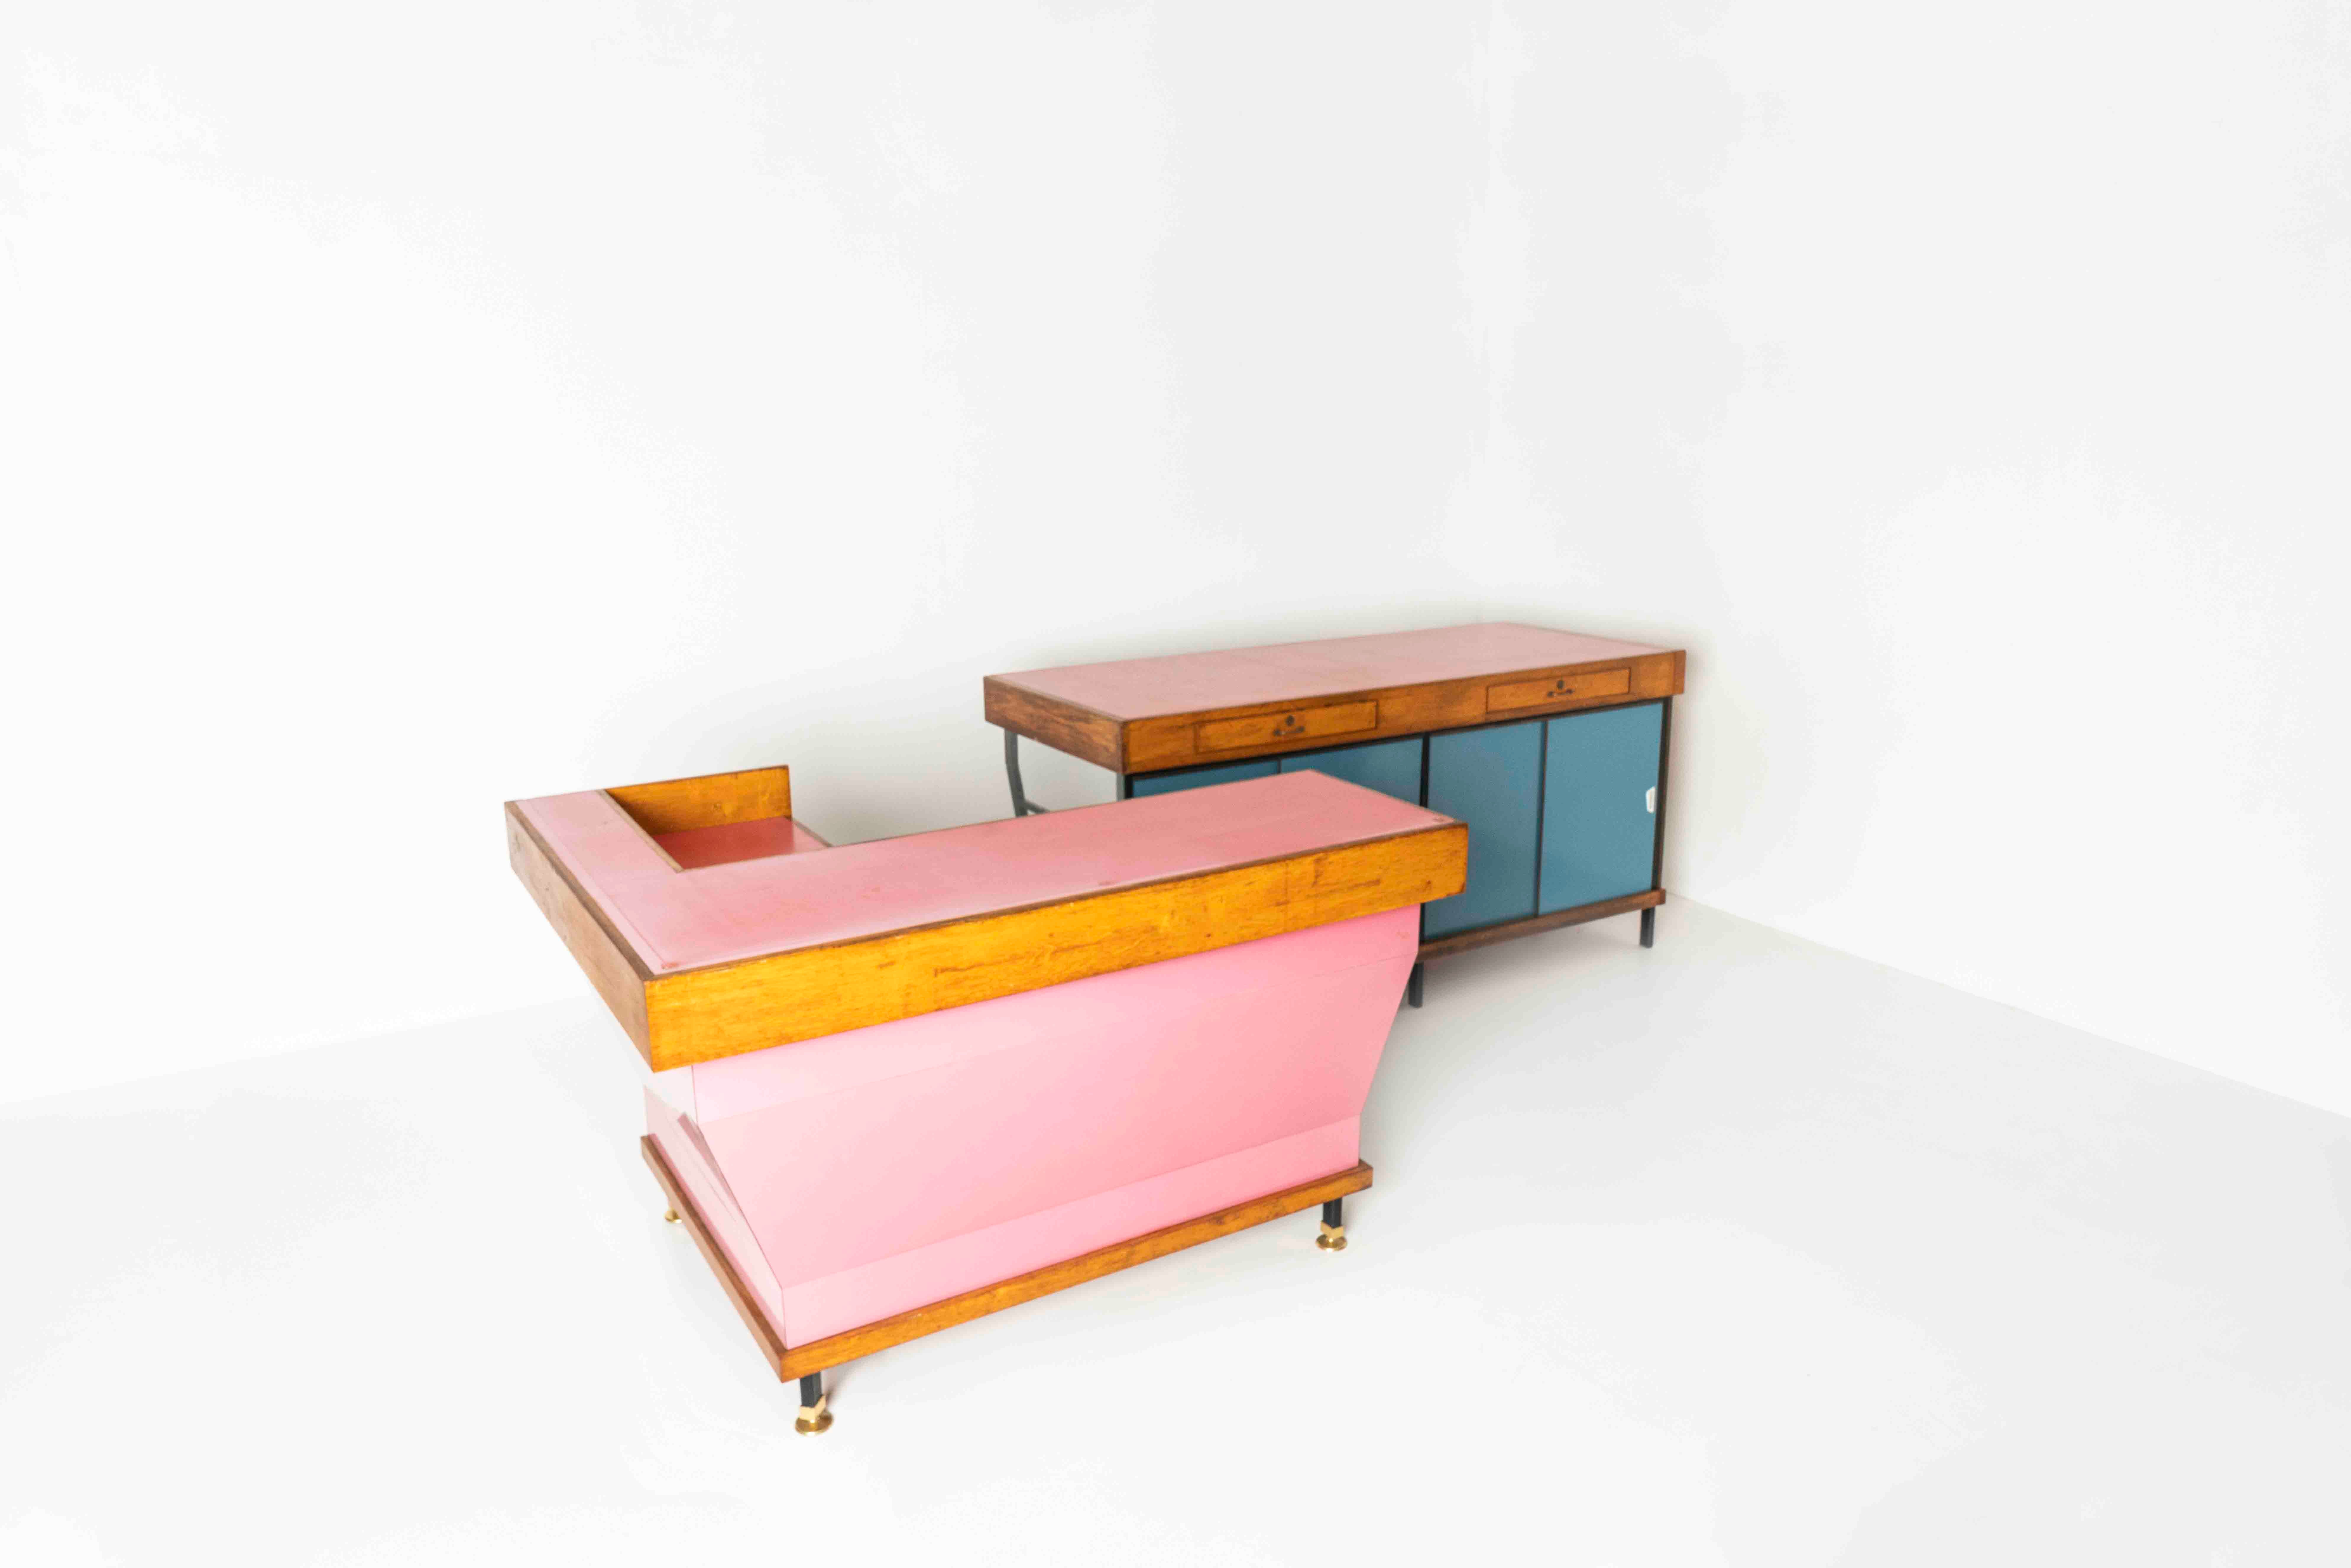 Impressive Italian vintage shop counter set consisting of two pieces from ca the 1960s. This set in 'candy colors' features a corner counter in pink with metal and brass feet. The other element has blue sliding doors, which is the counter's back.